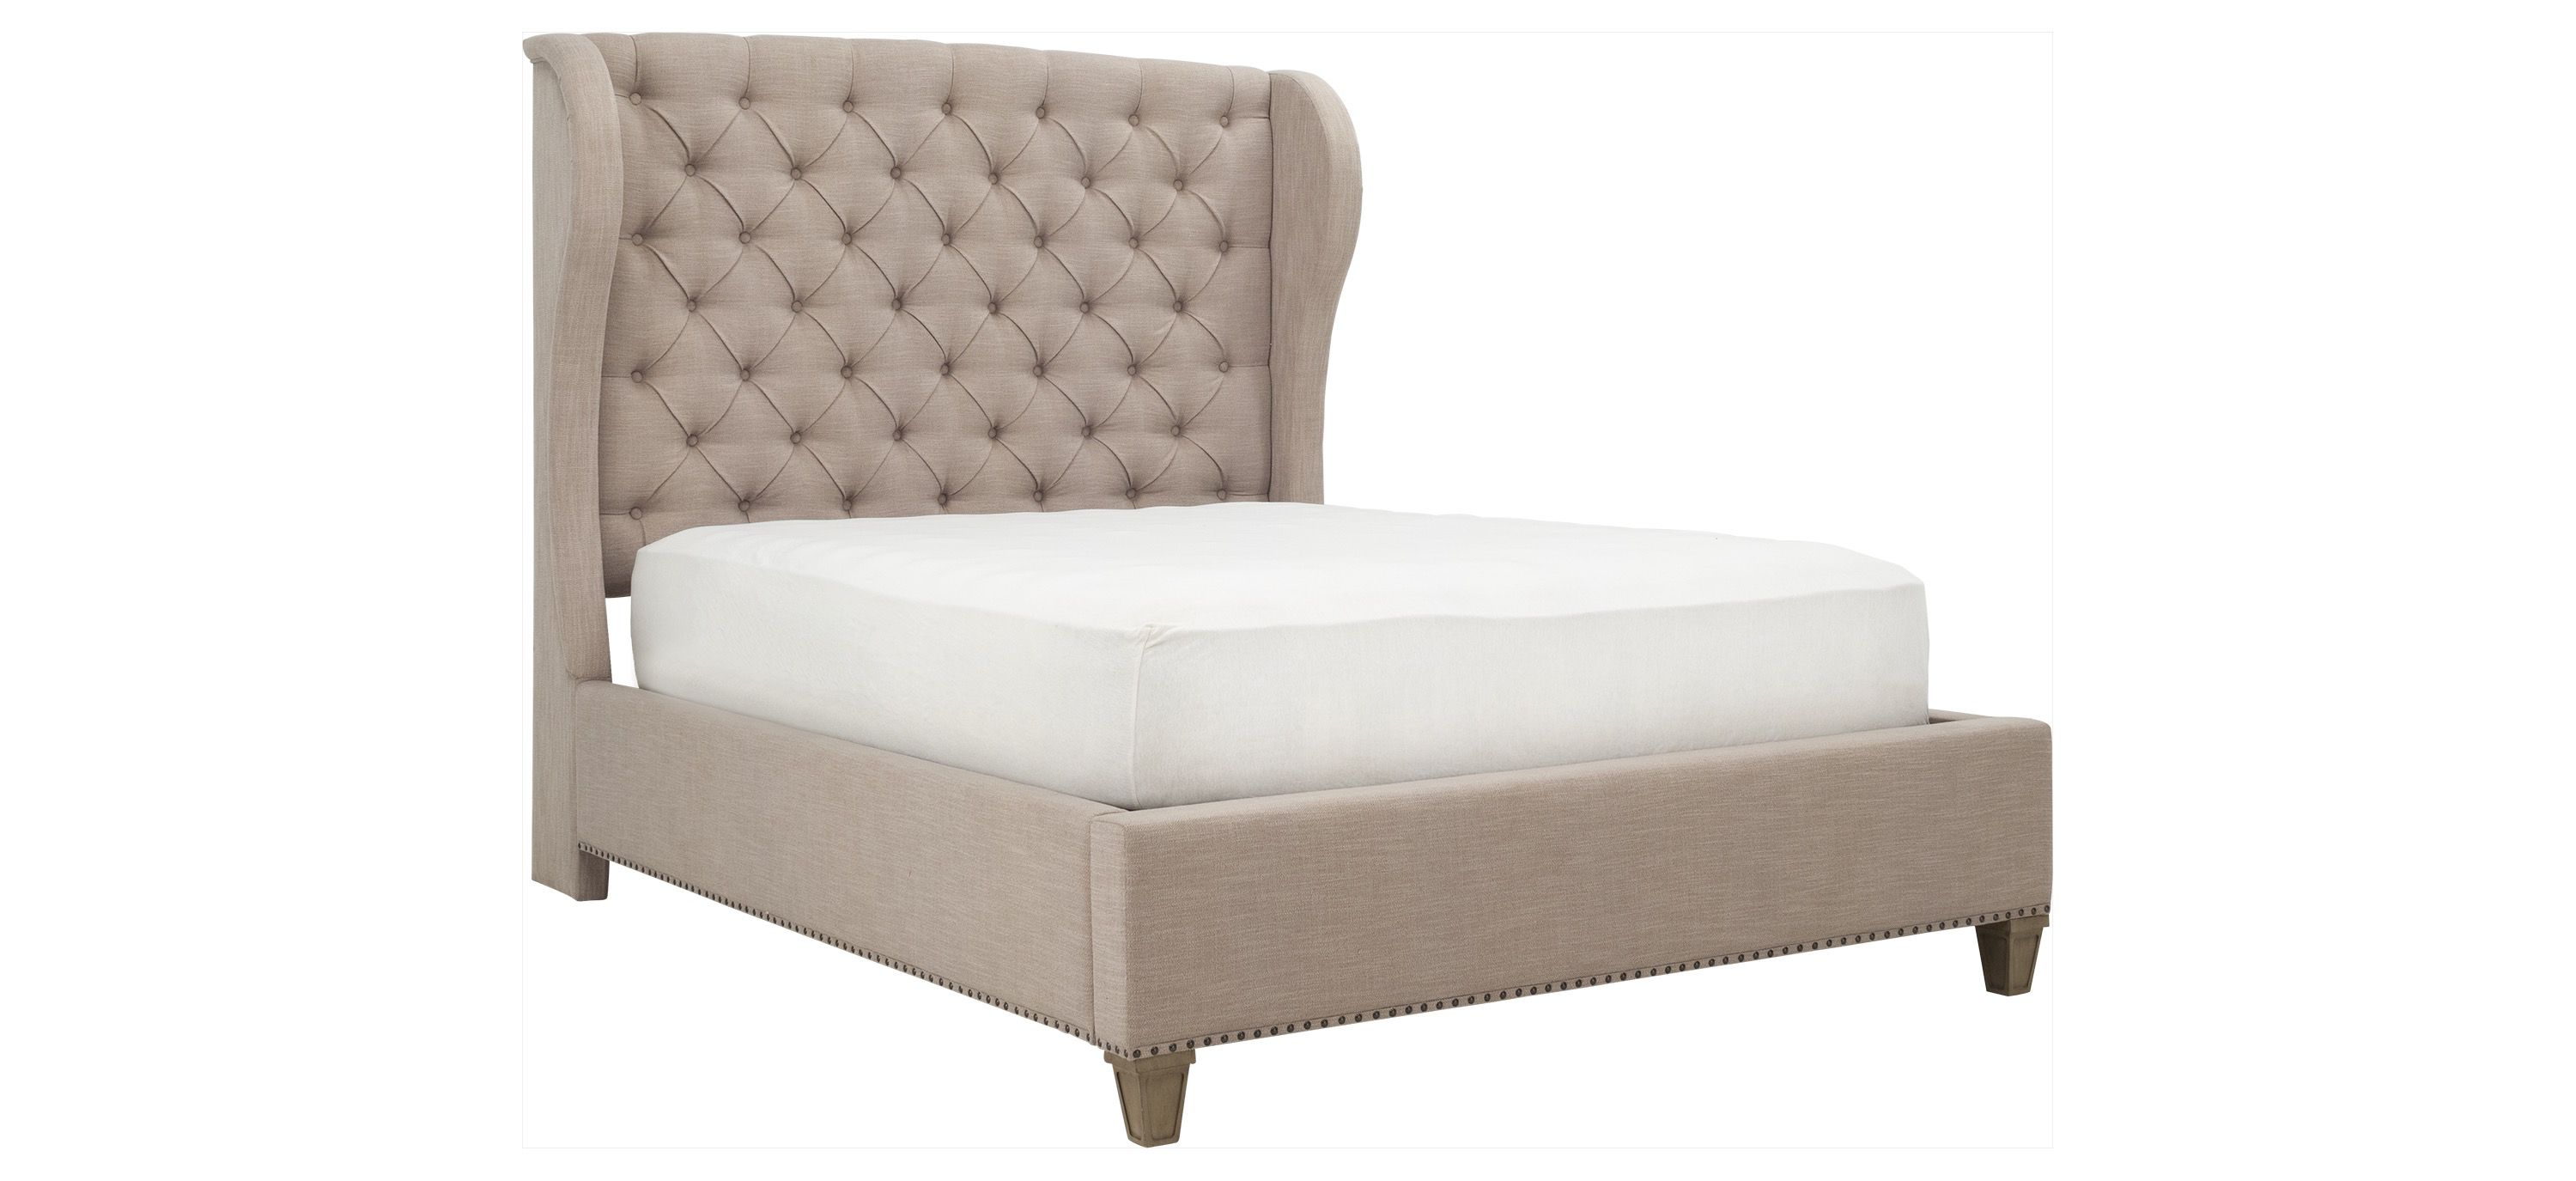 Lorient Upholstered Bed